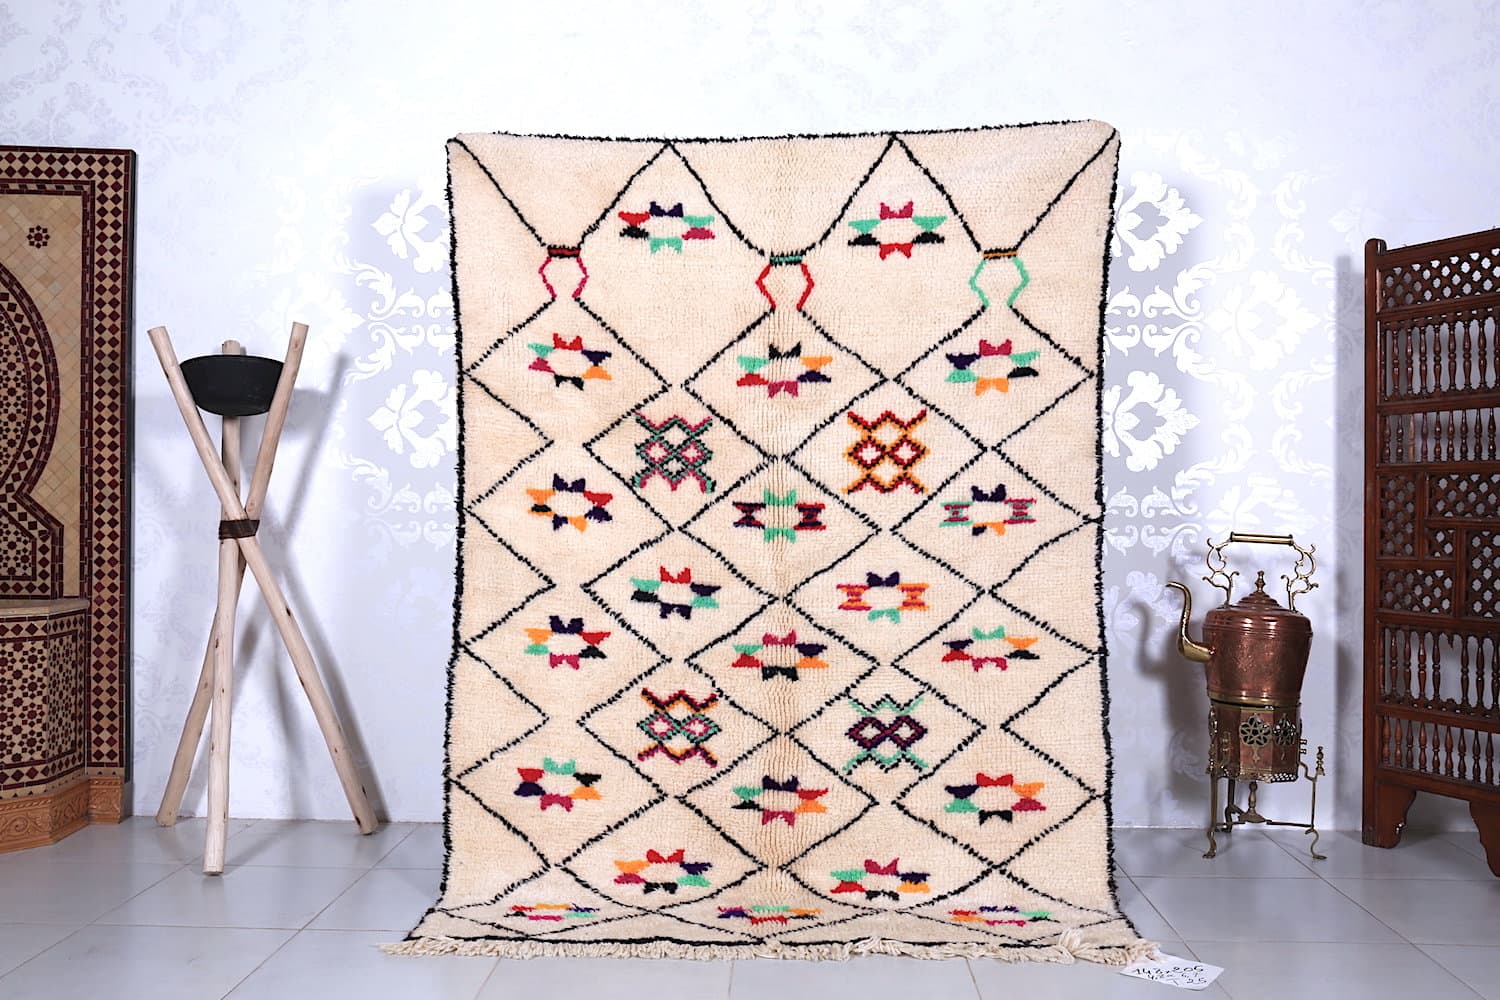 Moroccan Rugs, Kitchen Rugs, 2.5x4.6 ft Small Rug, Vintage Rugs, Turkish Rug